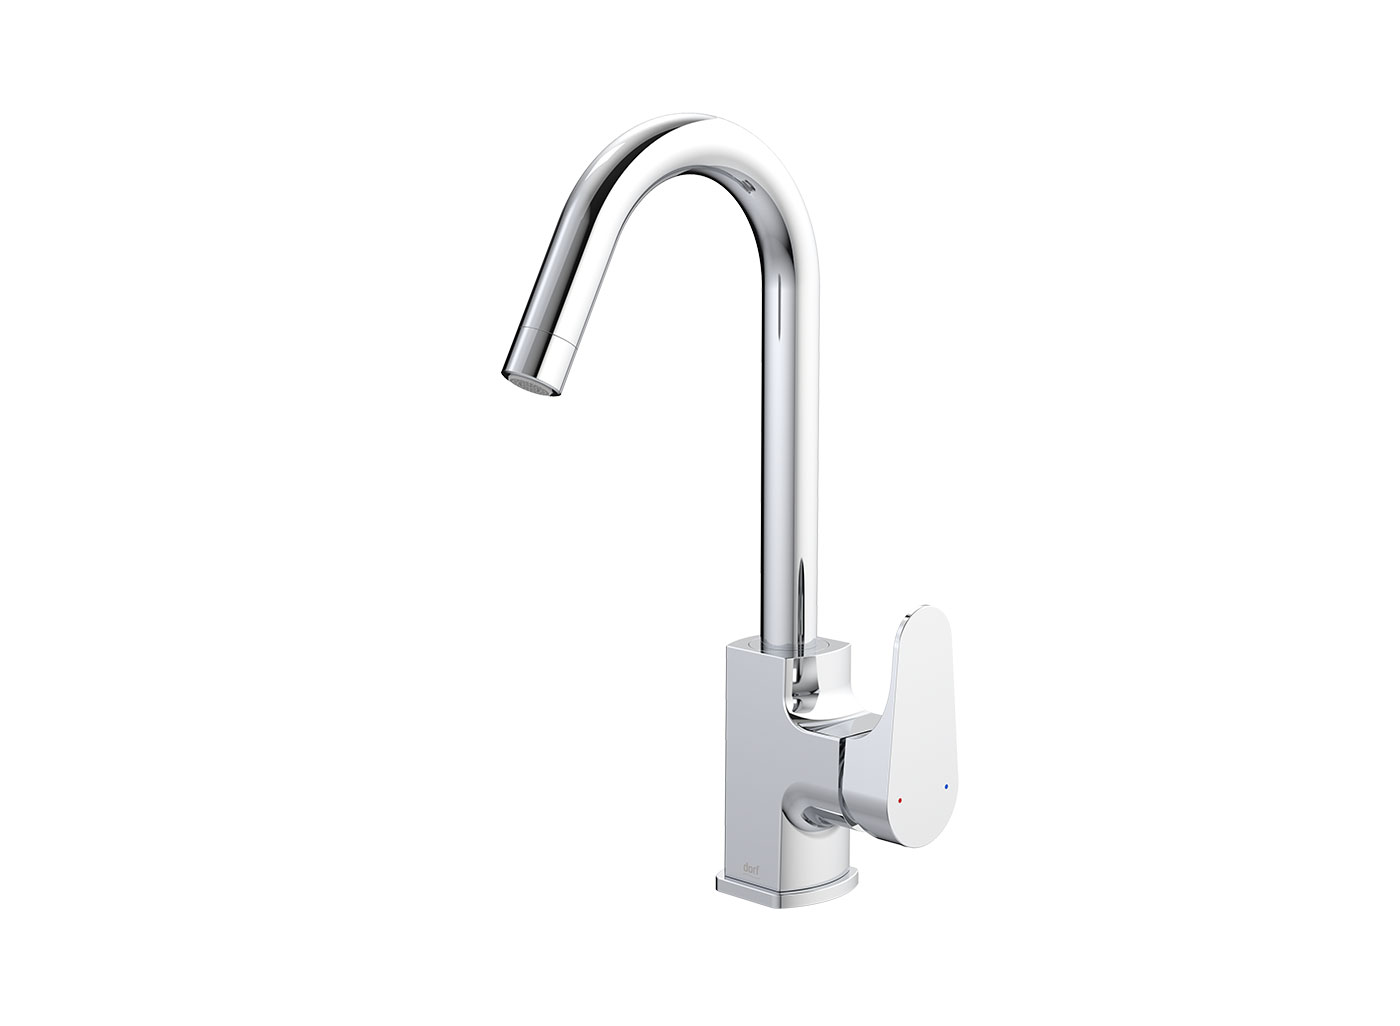 Clean lines and smooth surfaces. This durable range of modern mixers incorporates simple lines and smooth curves with appealing polished surfaces. Versatile and easy to accessorise